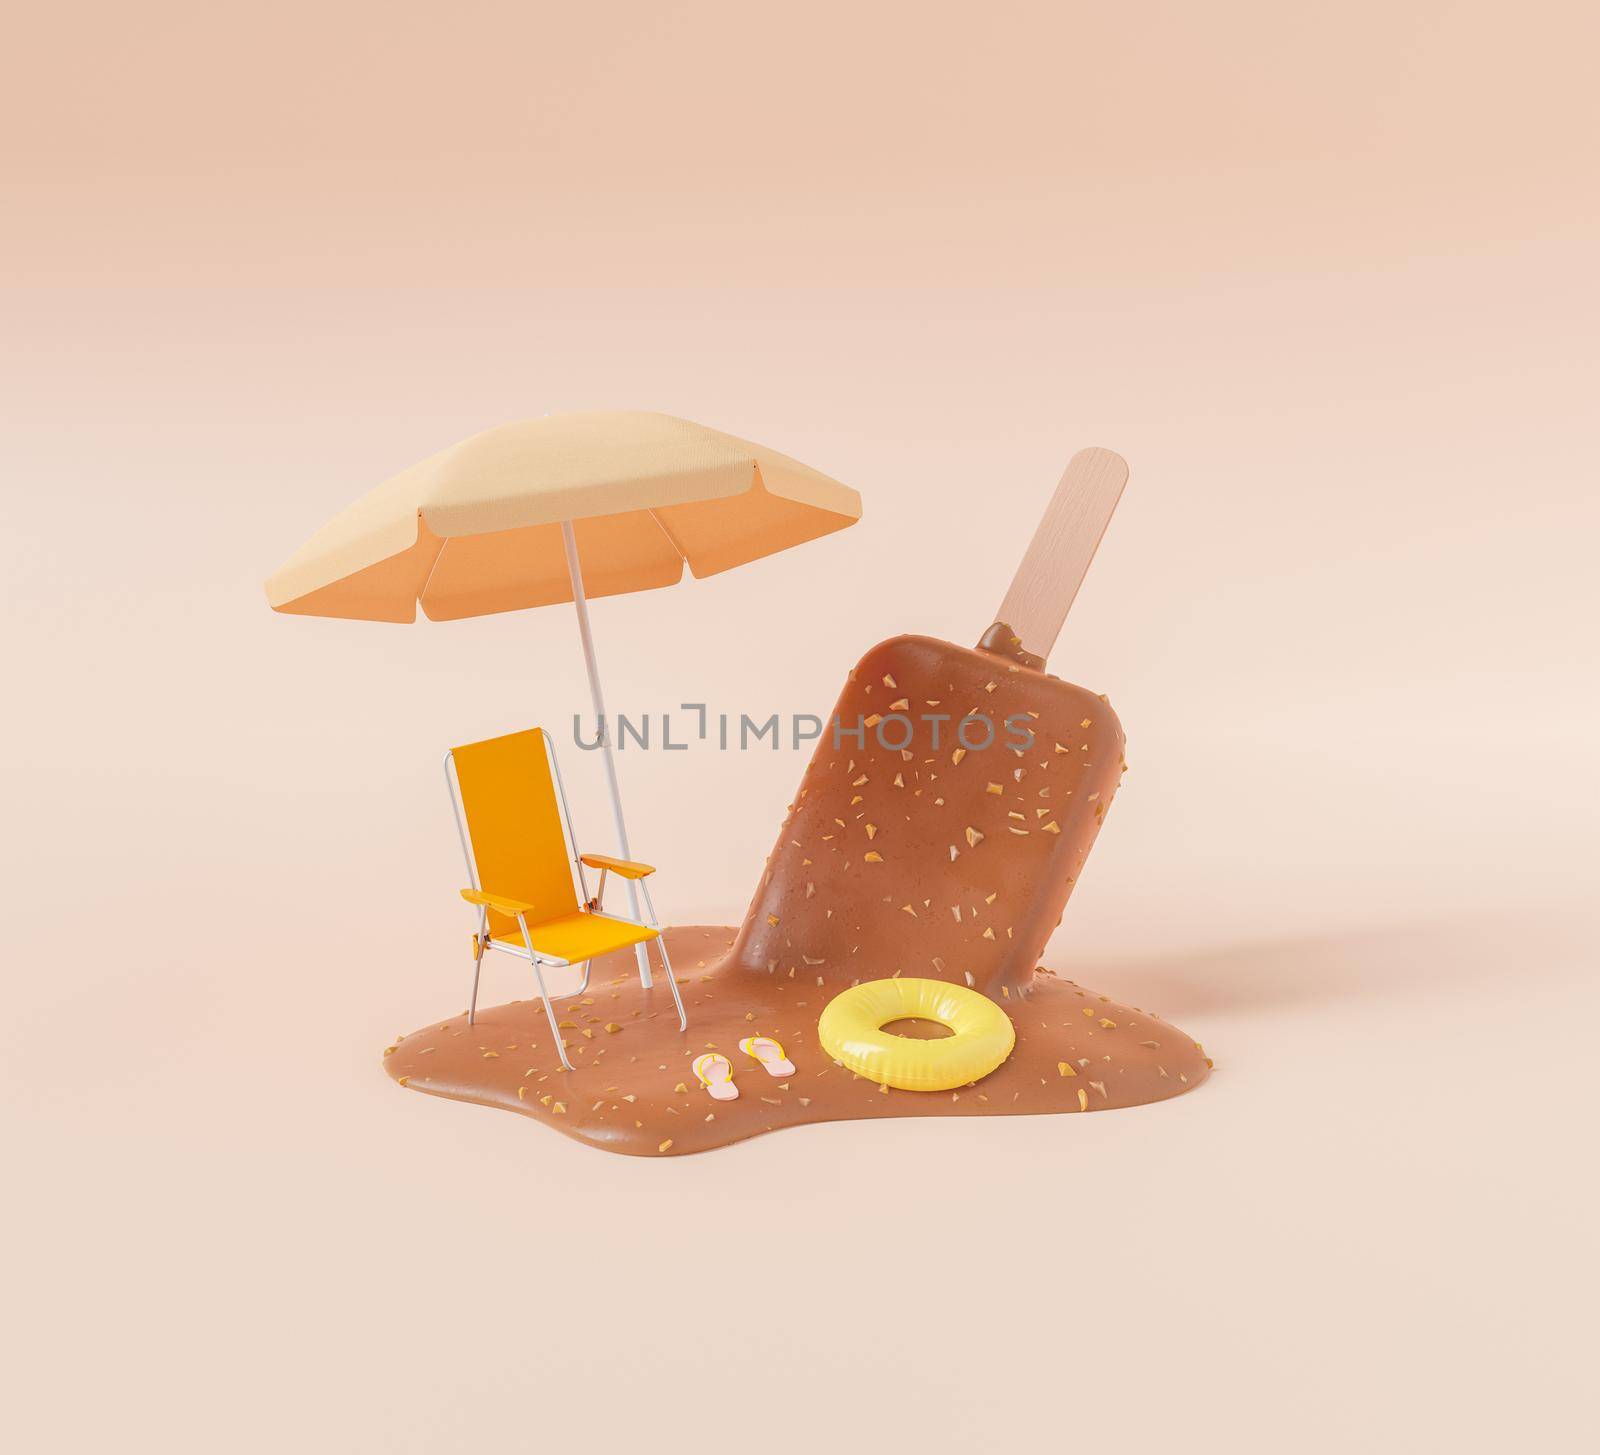 3D illustration of deckchair and parasol placed near flip flops and tube on melted chocolate ice cream during summer vacation against peach background